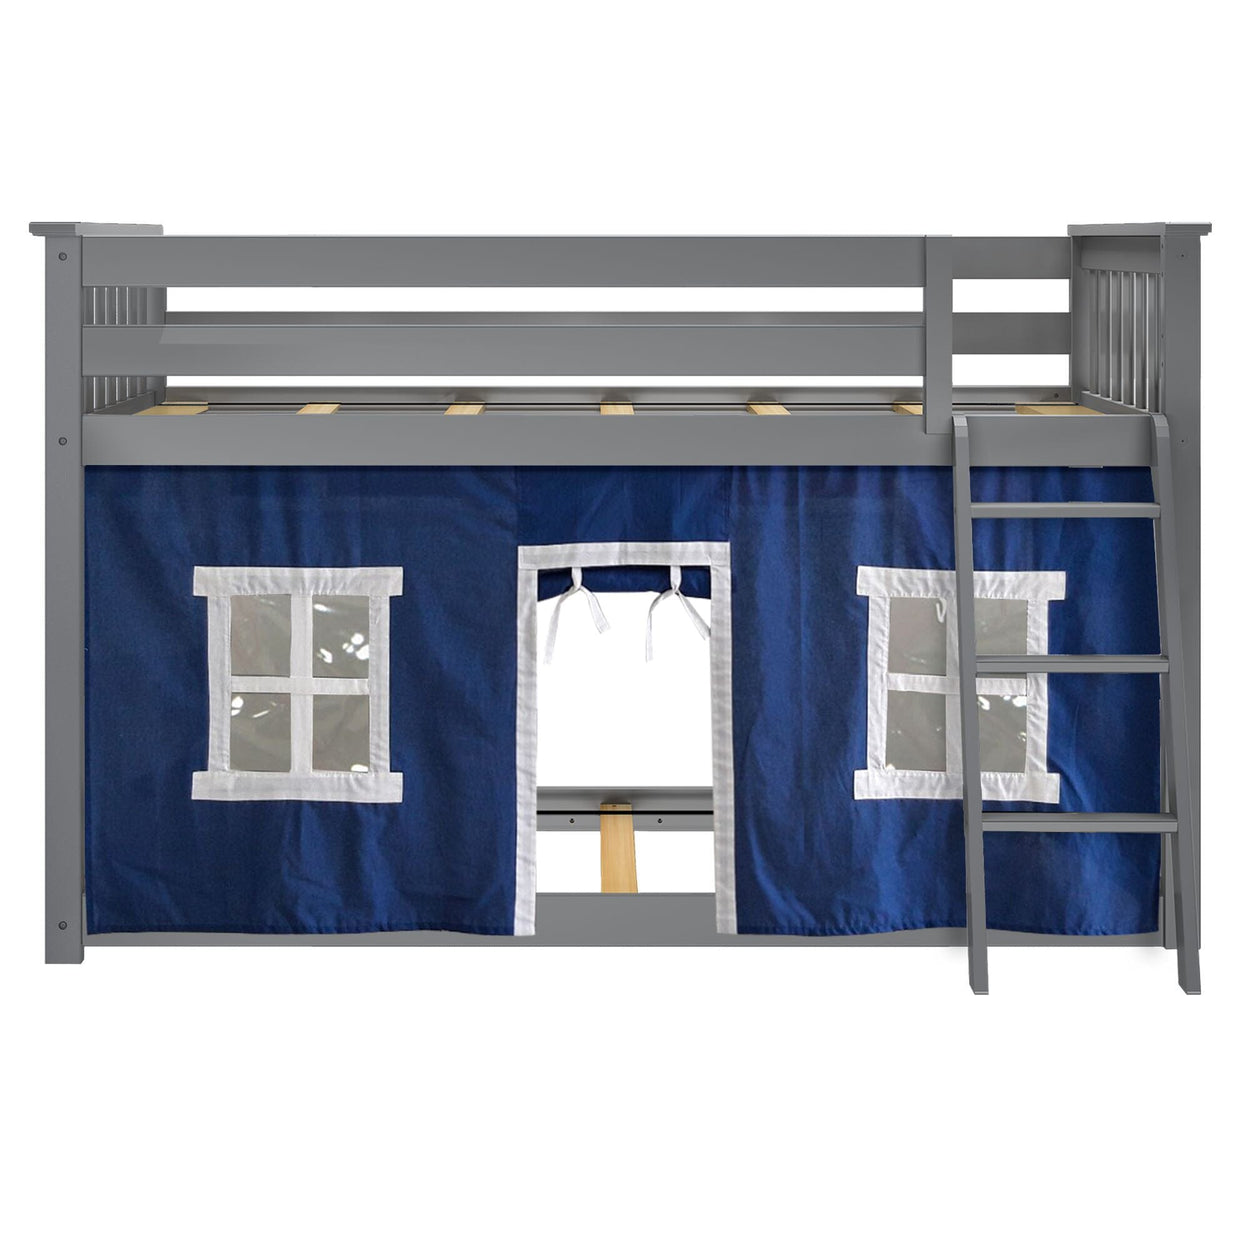 180214121022 : Bunk Beds Twin-Size Low Bunk Bed With Curtain, Grey + Blue